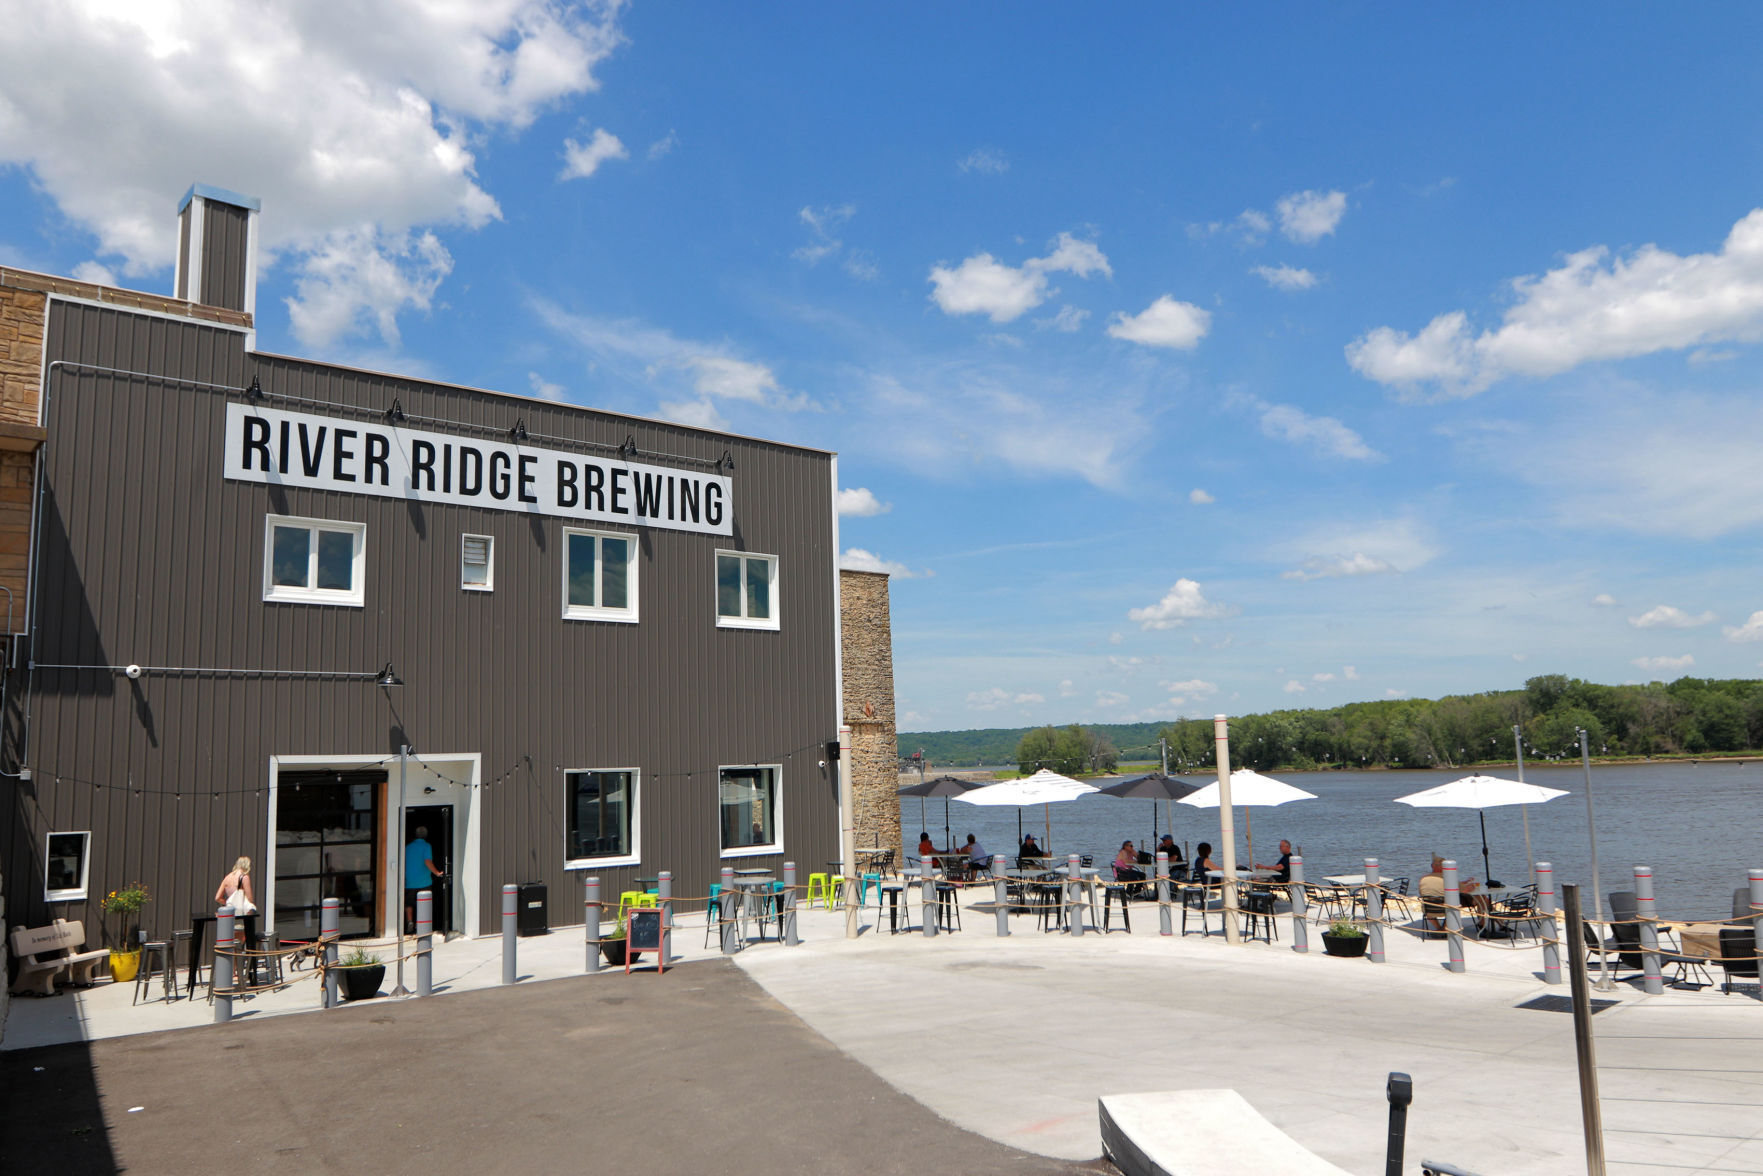 River Ridge Brewing opened its new location at 303 S. Riverview St. in Bellevue, Iowa, in early April. PHOTO CREDIT: Katie Goodale